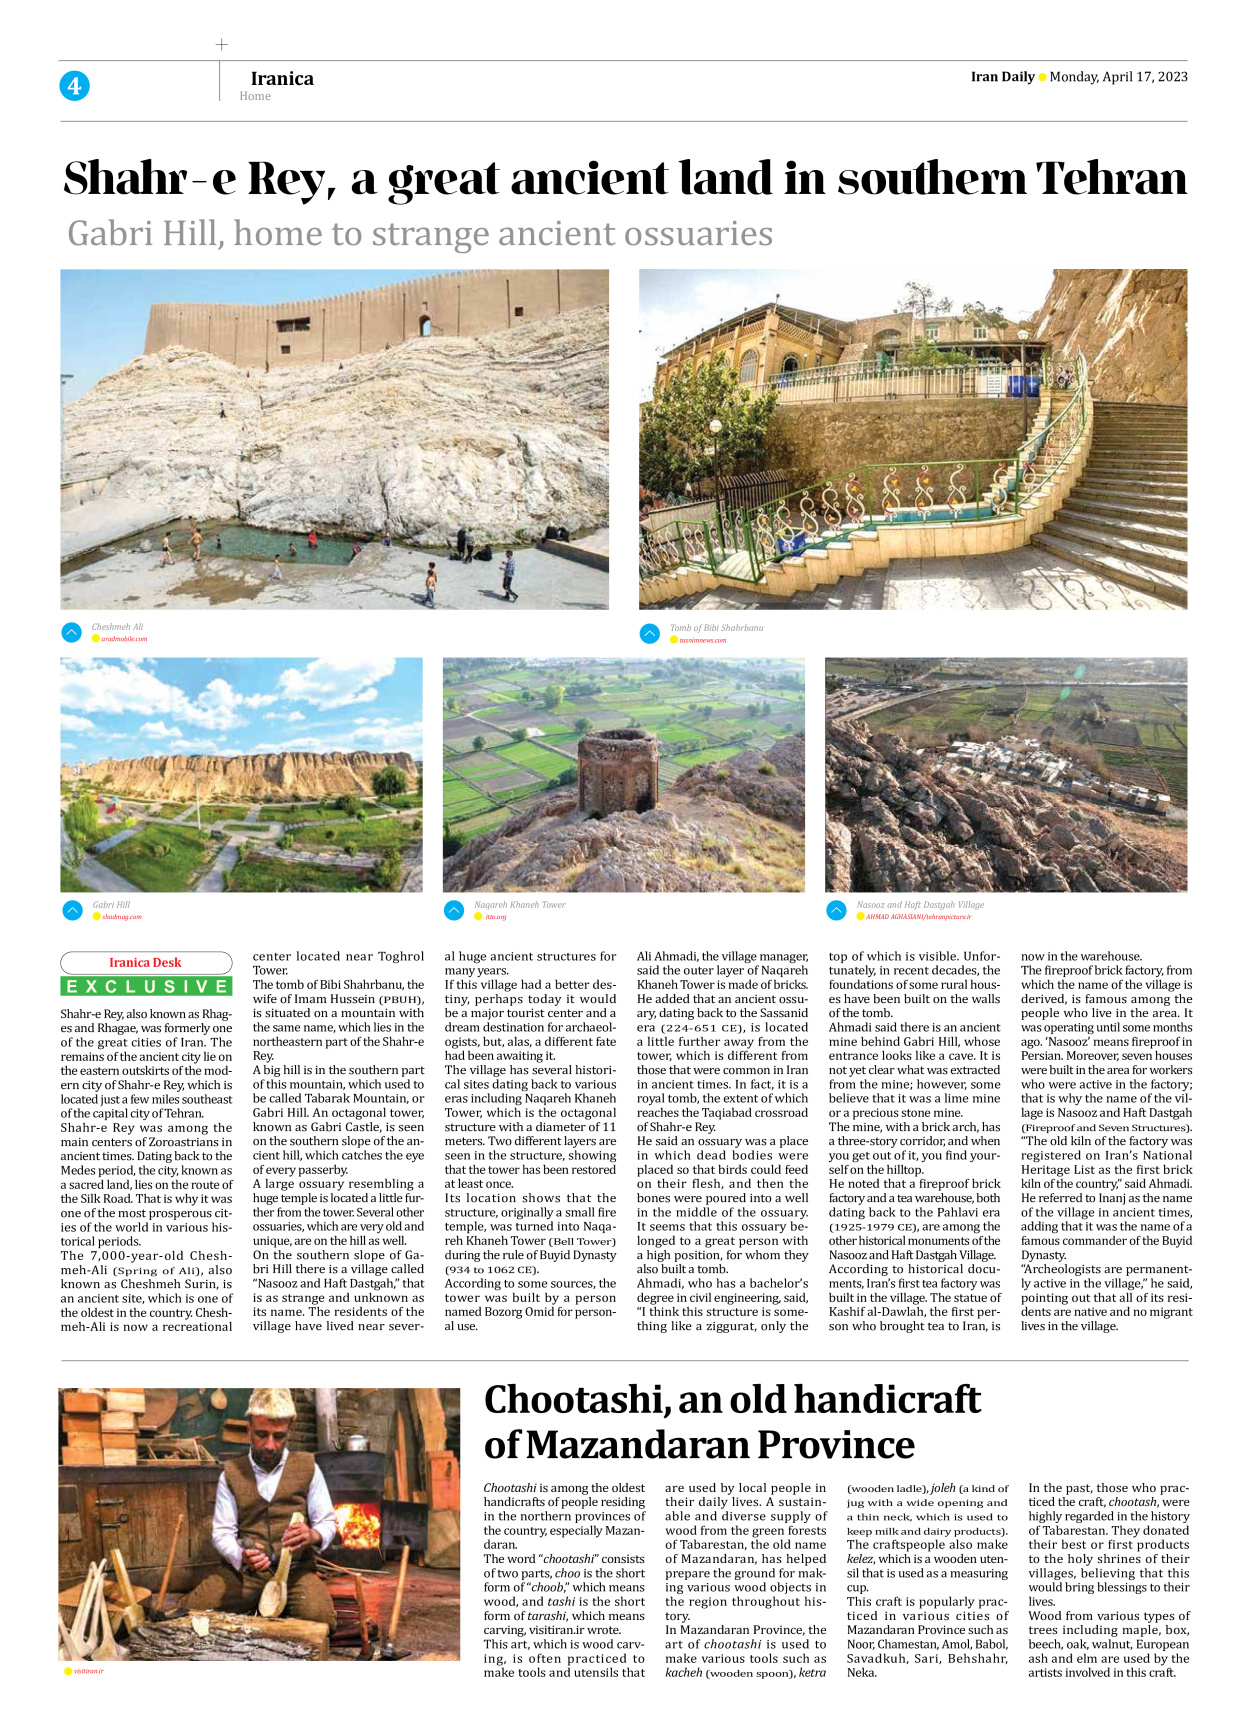 Iran Daily - Number Seven Thousand Two Hundred and Seventy - 17 April 2023 - Page 4